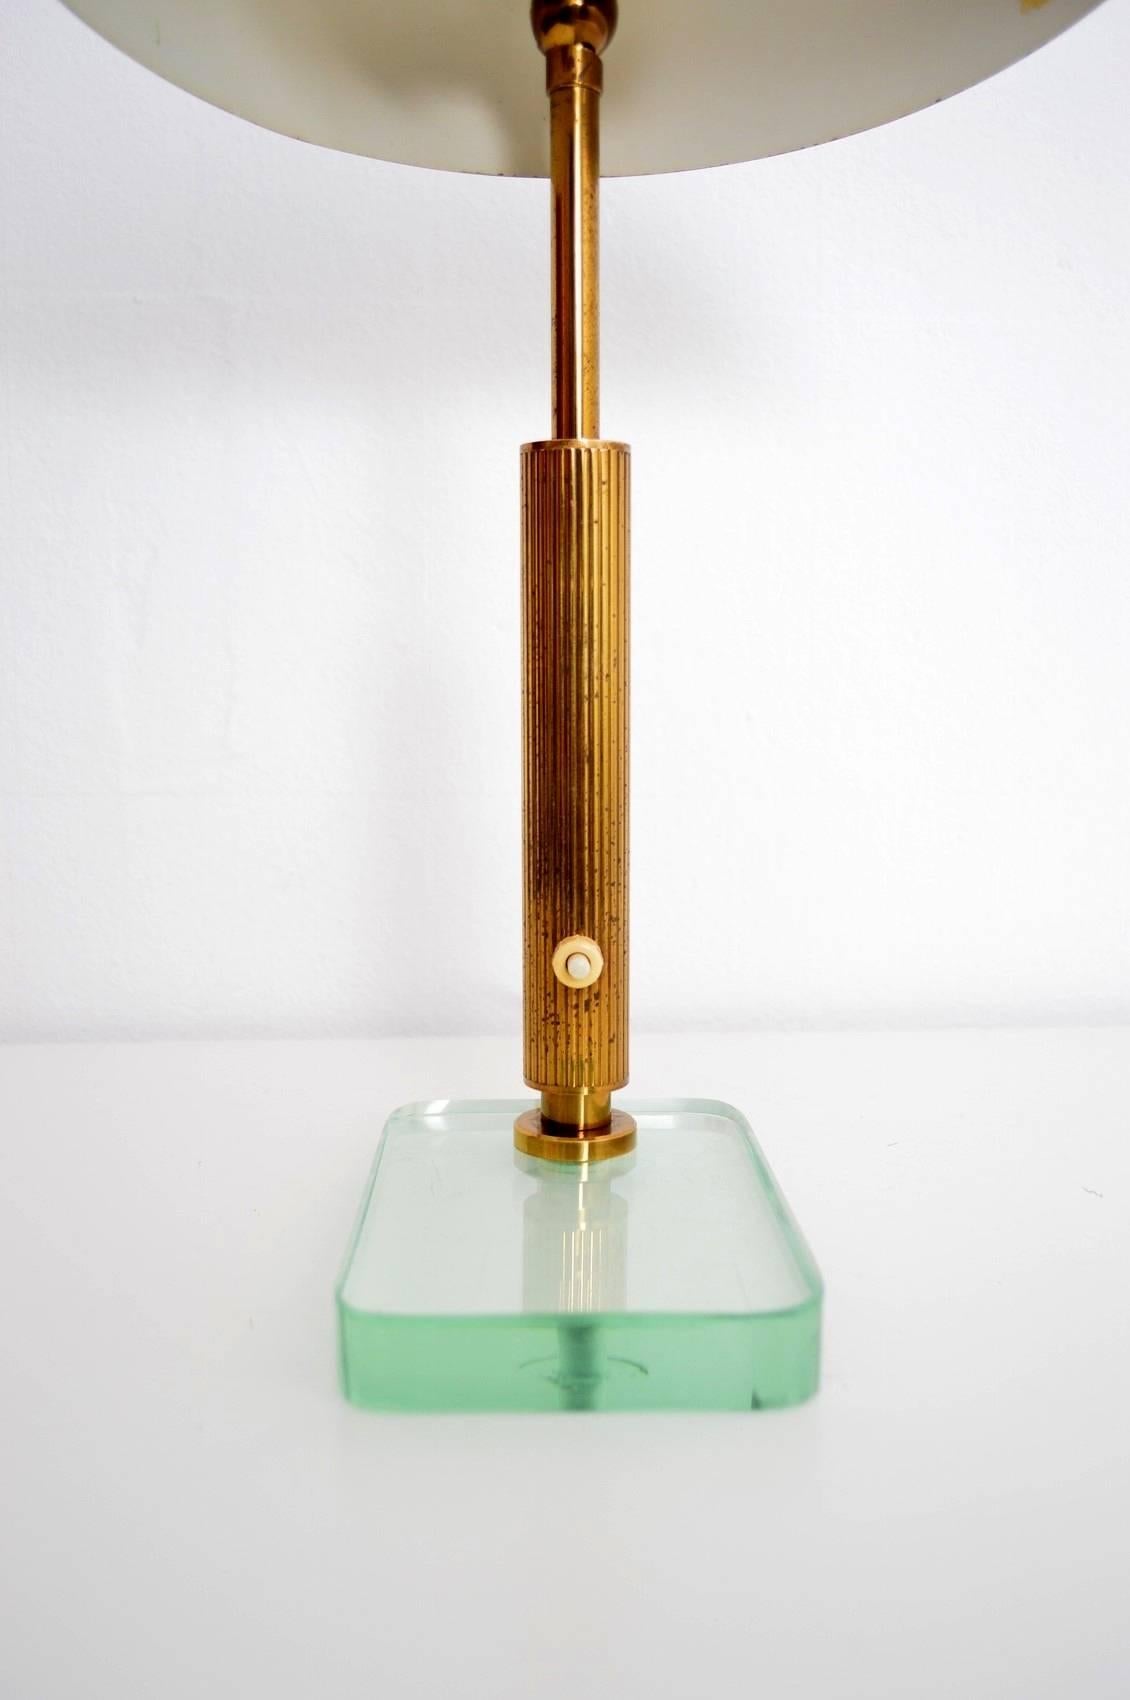 20th Century Italian Midcentury Brass and Glass Desk or Table Lamp, 1950s